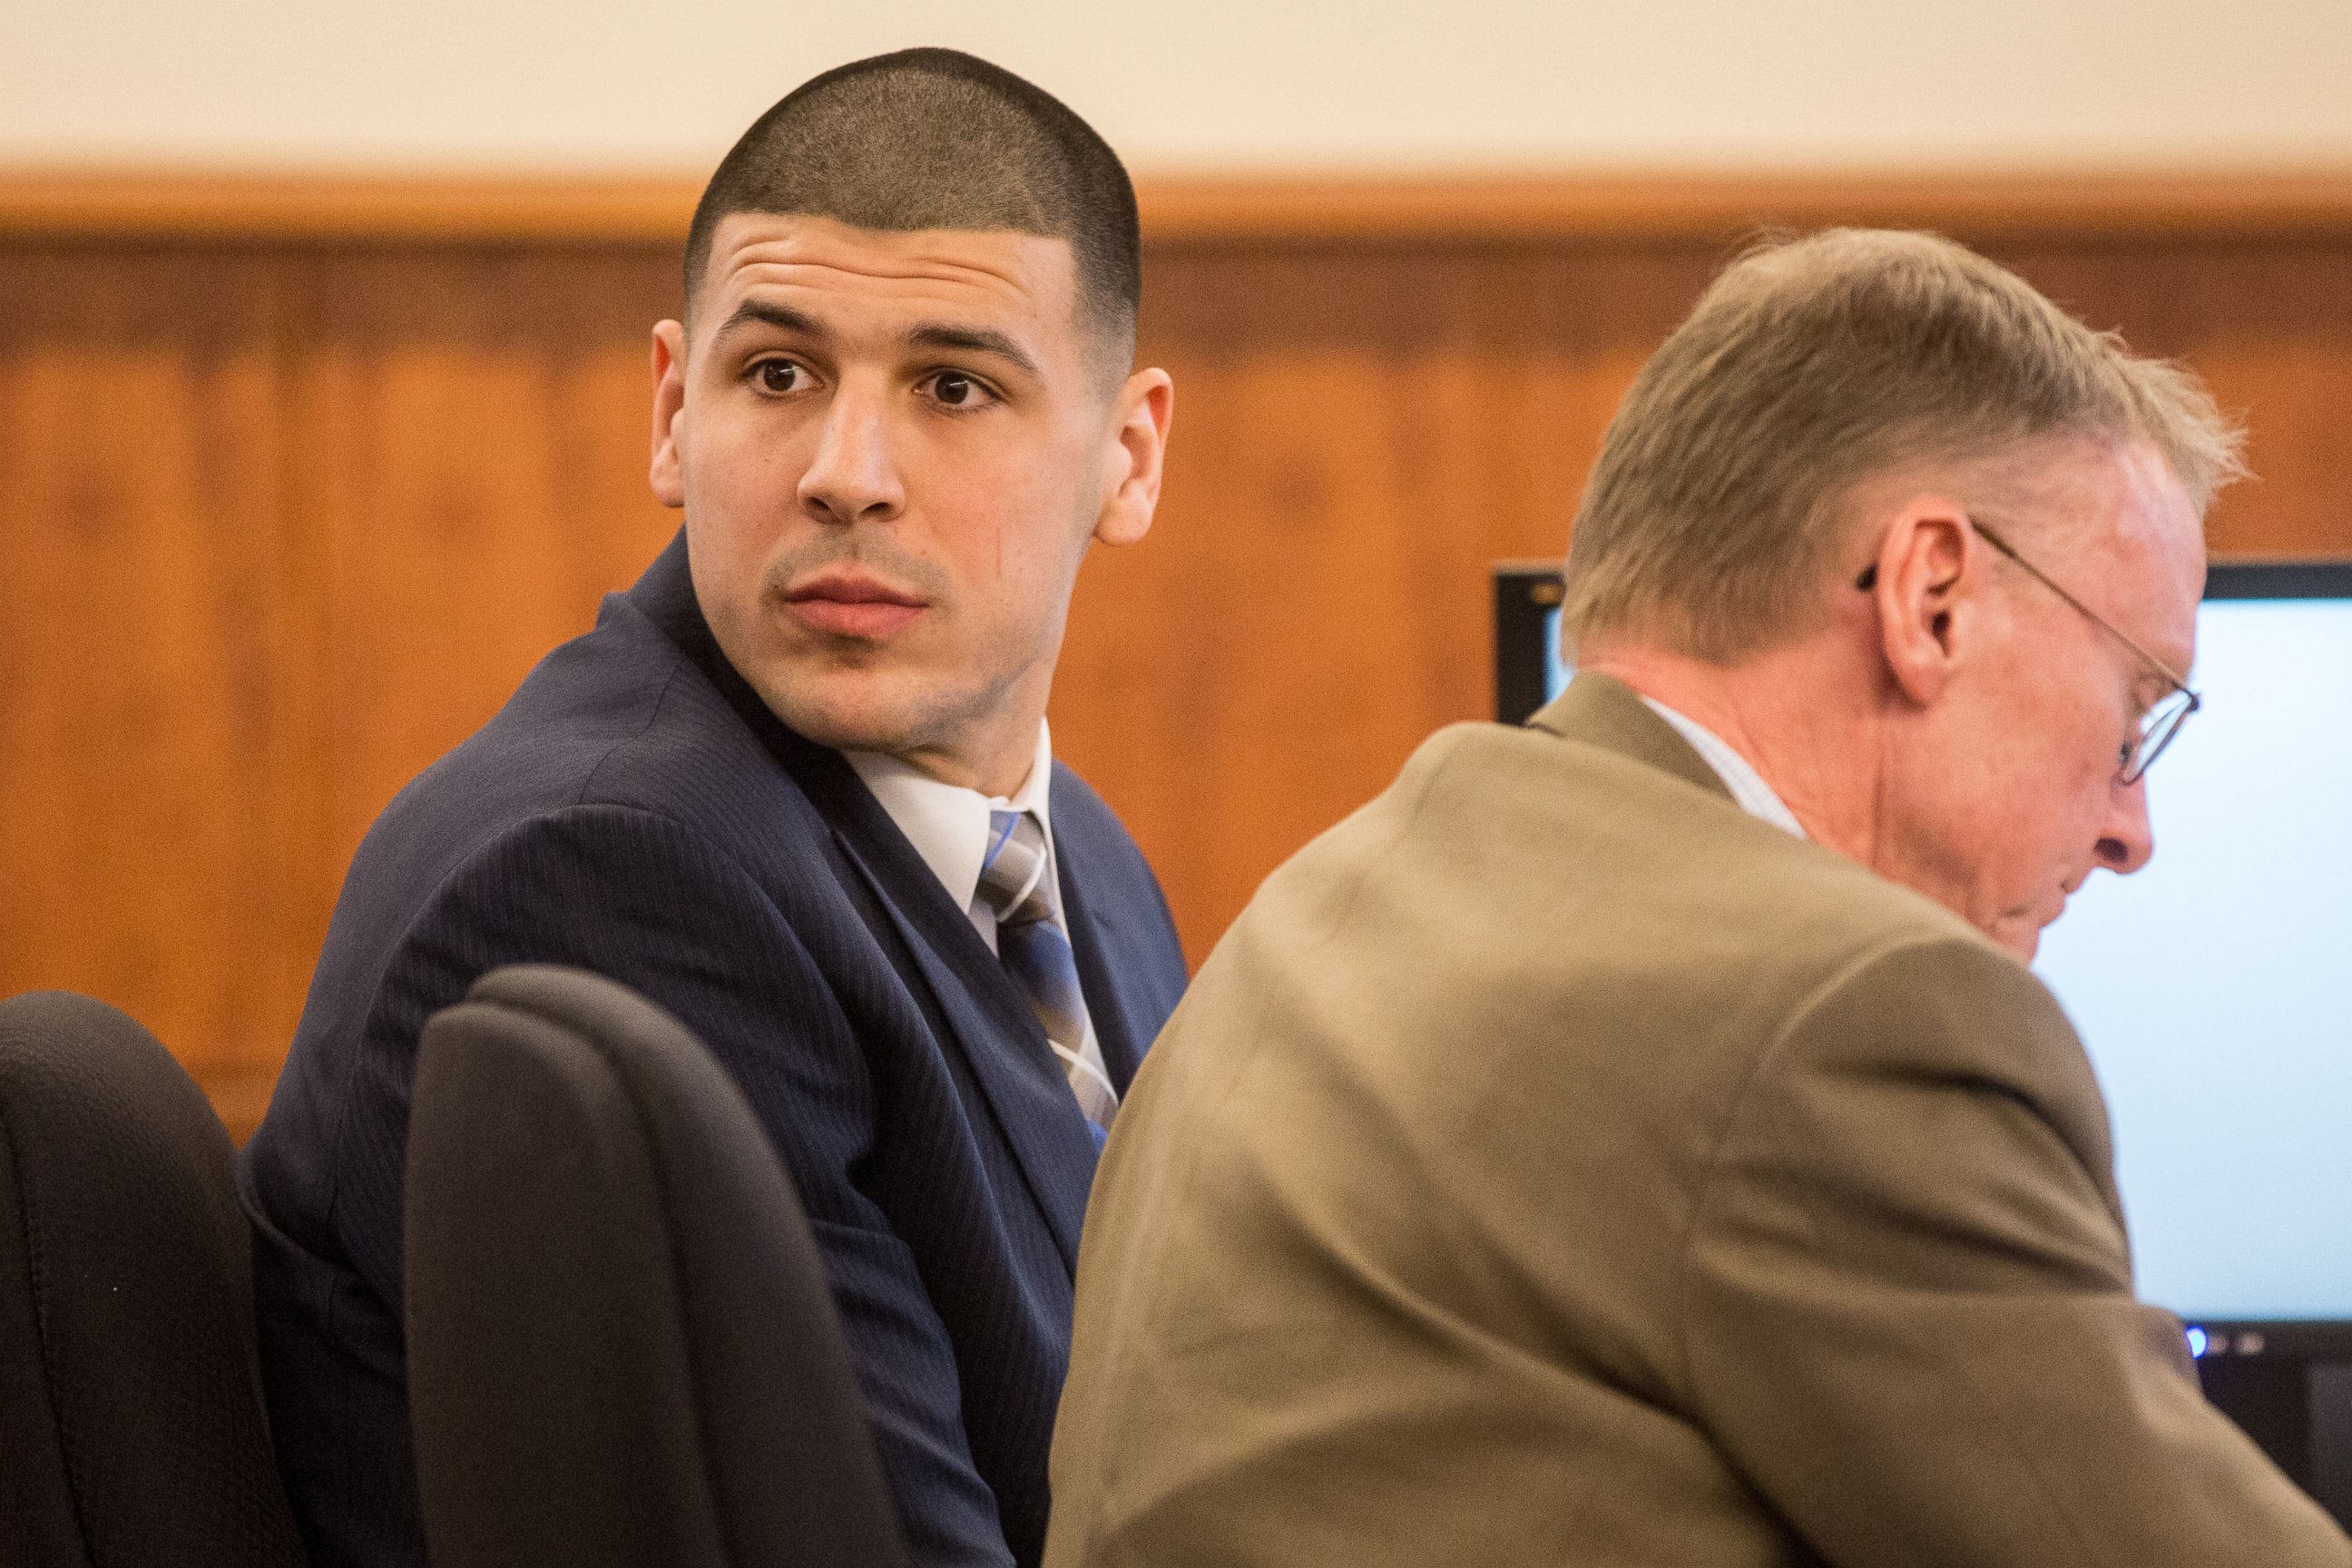 PHOTO: Former New England Patriots football player Aaron Hernandez, left, looks back as he sits with his attorney Charles Rankin during his murder trial, Feb. 13, 2015, in Fall River, Mass.